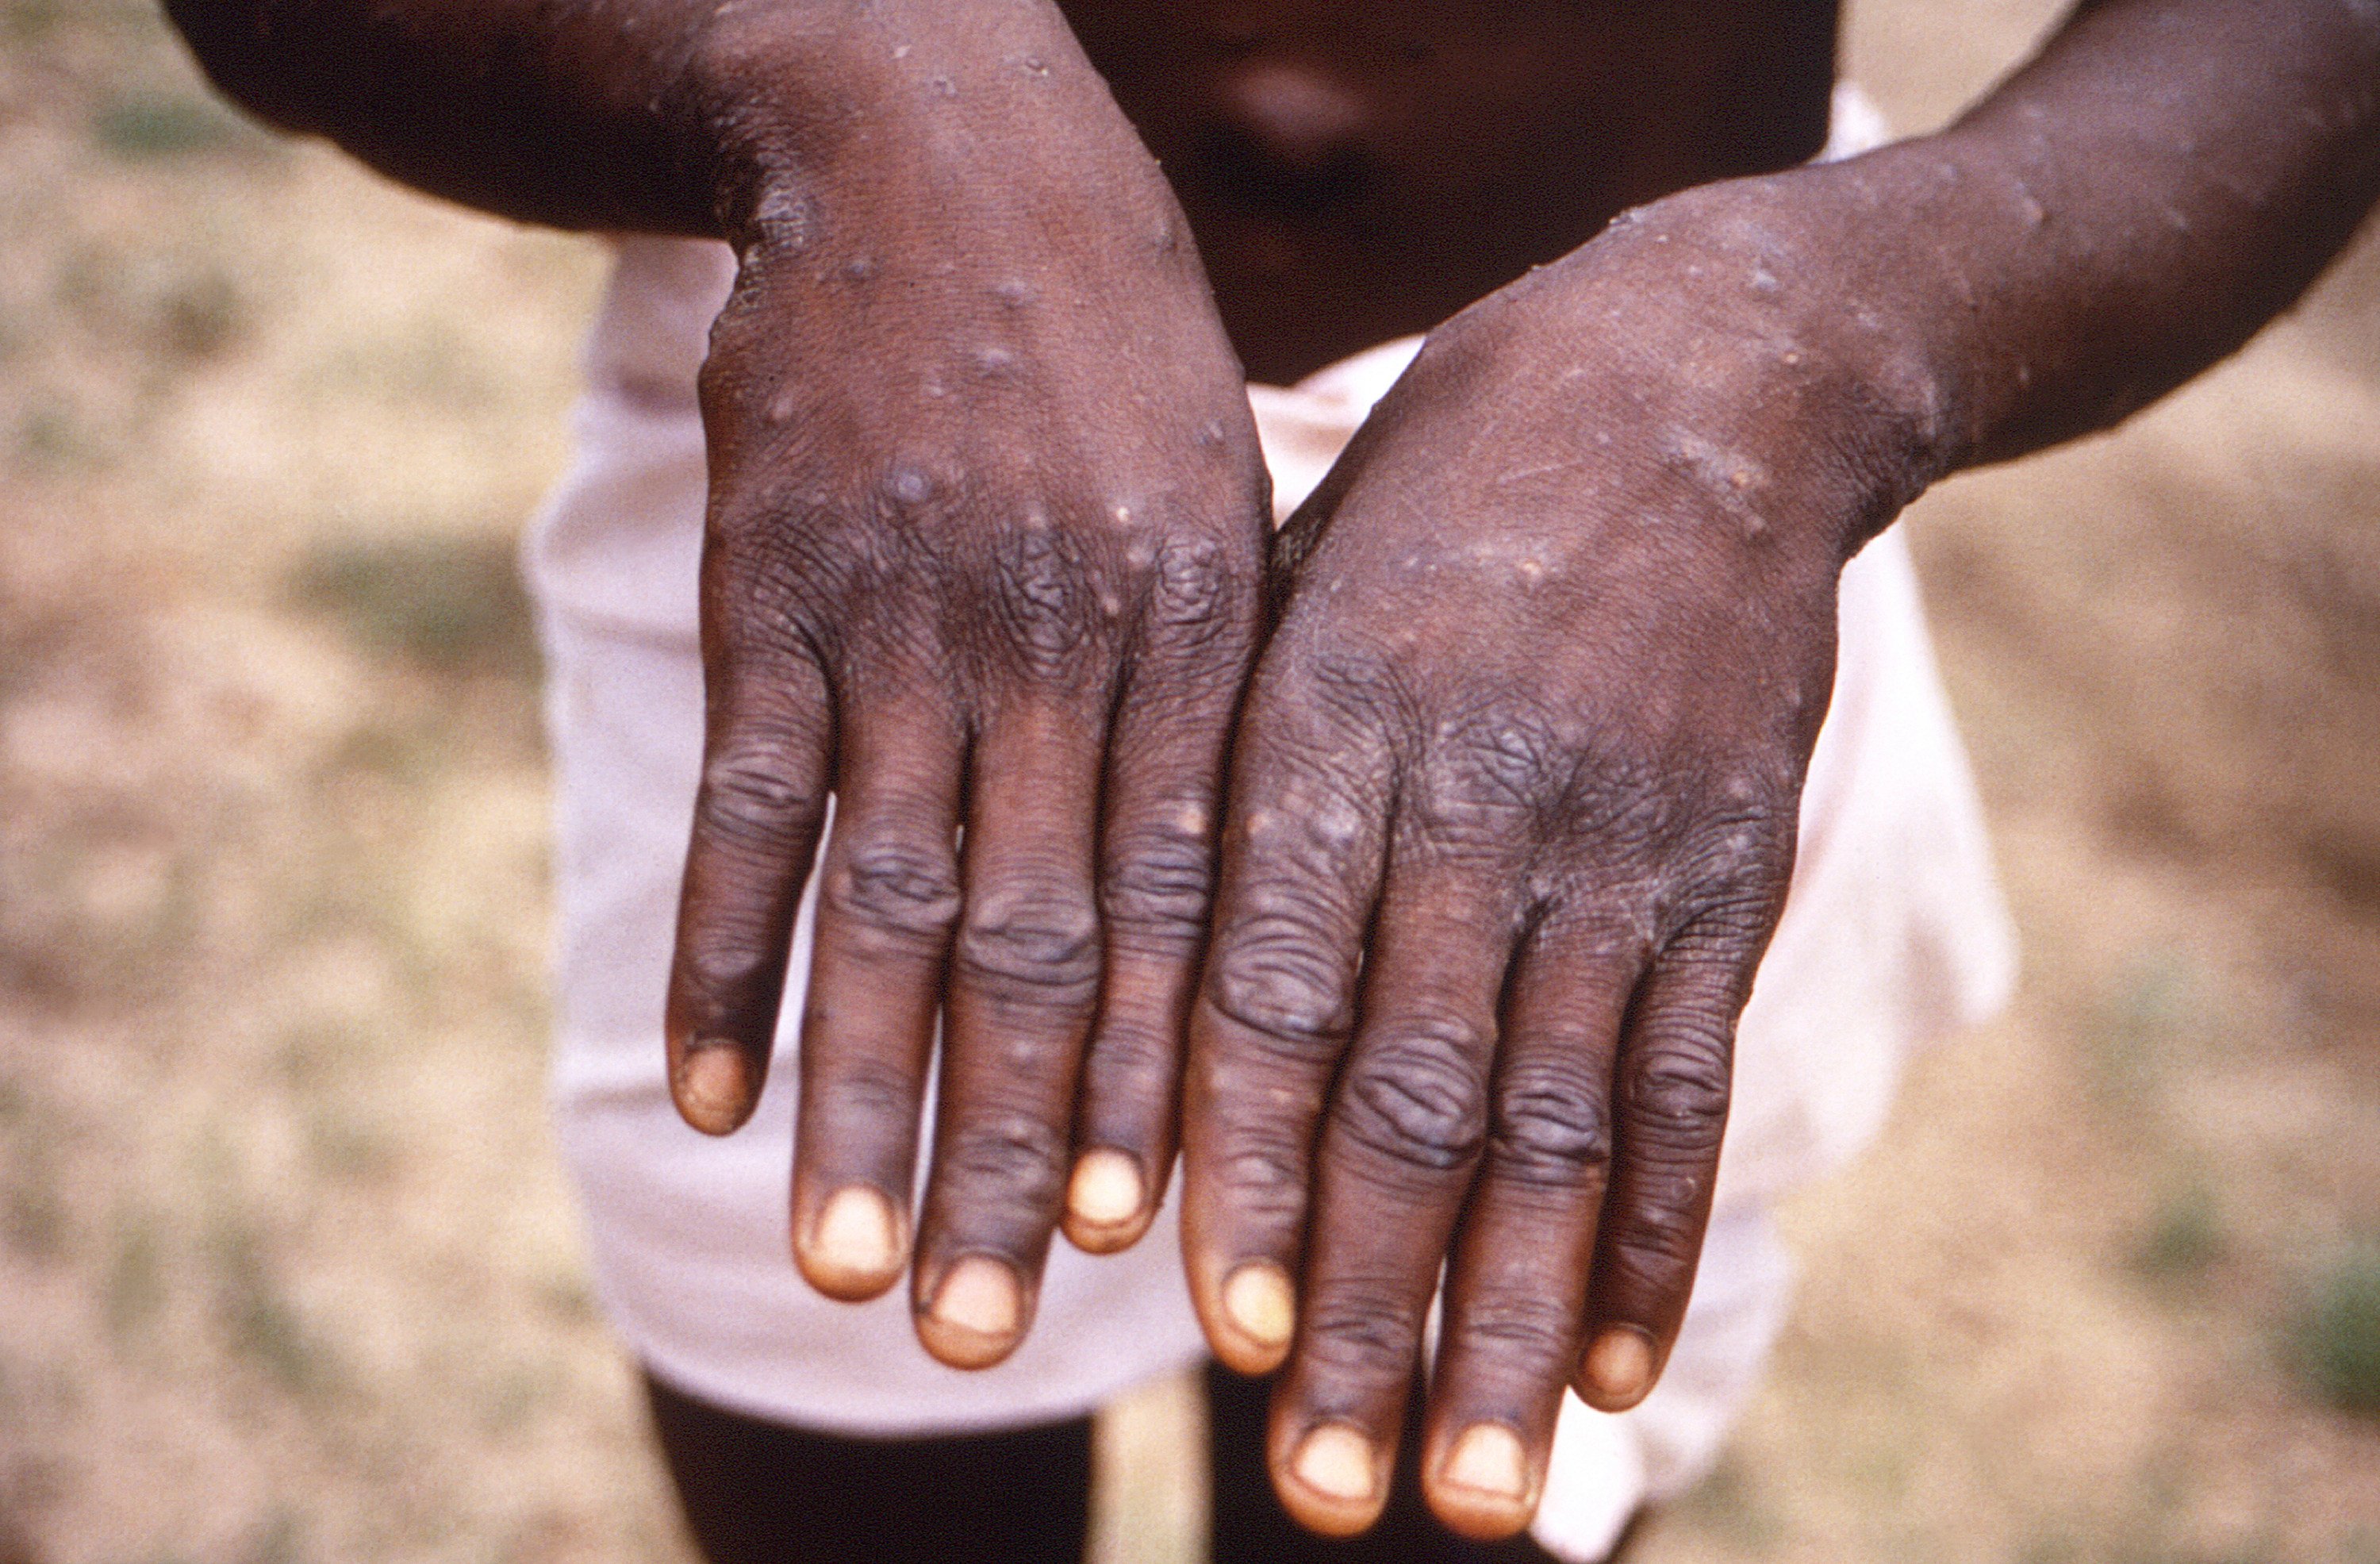 The characteristic rash of mpox is seen on the hands of a patient. As Congo copes with its biggest outbreak of mpox, scientists warn discrimination against gay and bisexual men on the continent could make it worse. File photo: CDC via AP